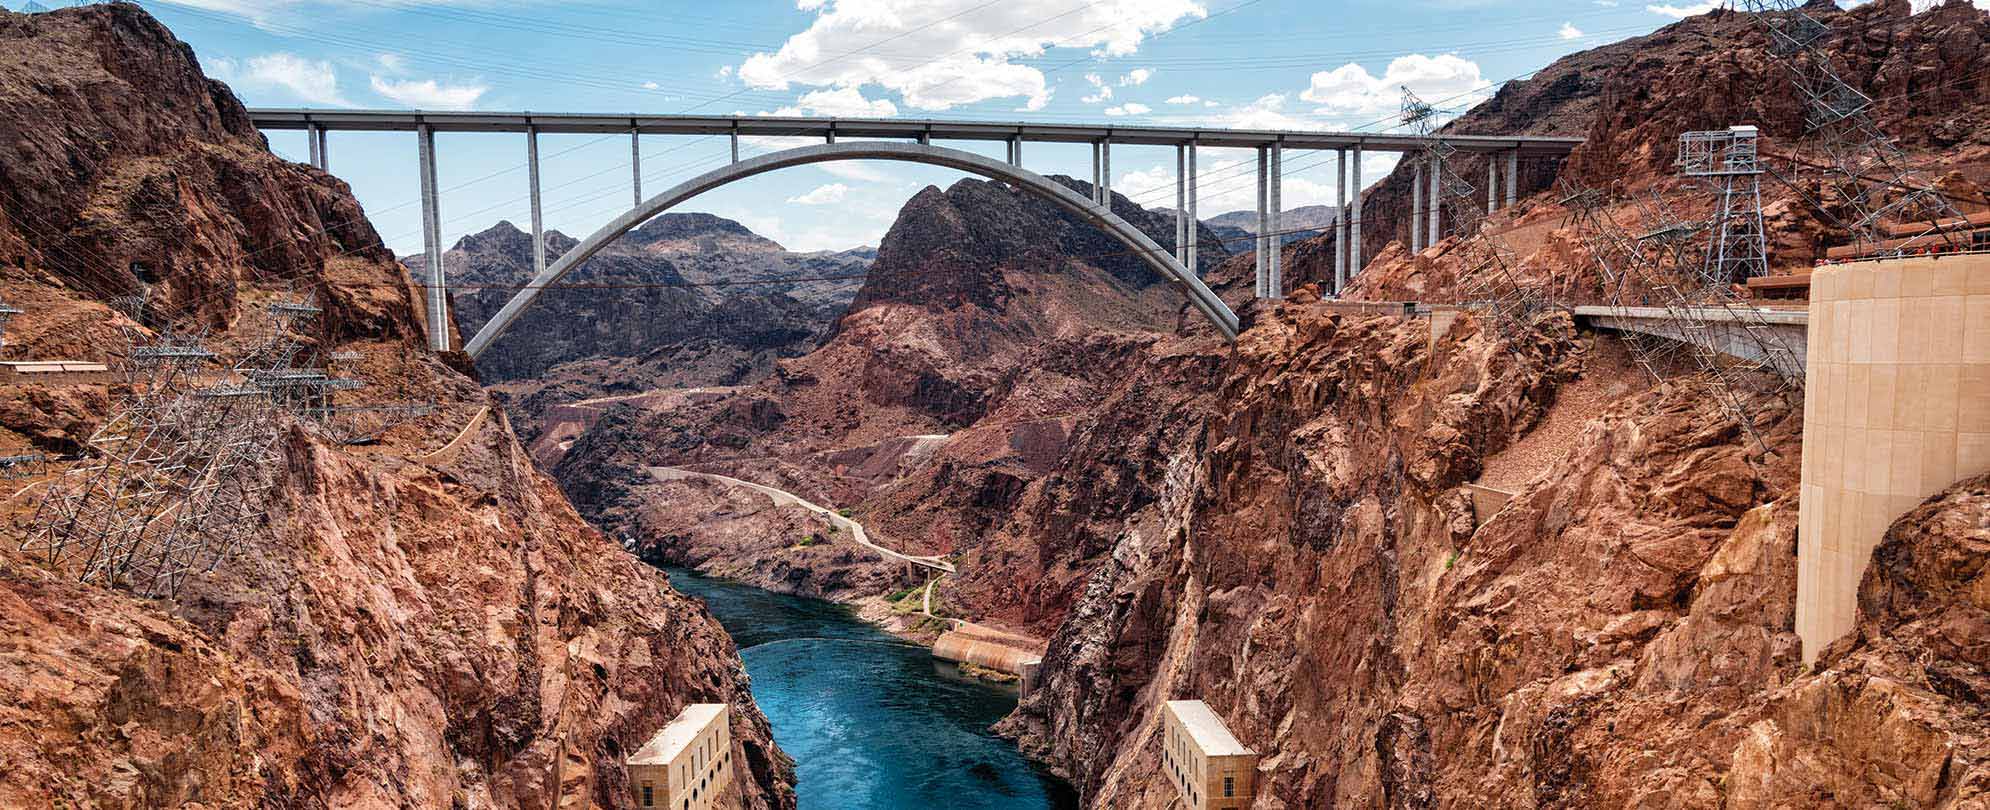 The Hoover Dam Bridge over Lake Mead during a vacation to Lake Mead National Recreation Area in Nevada